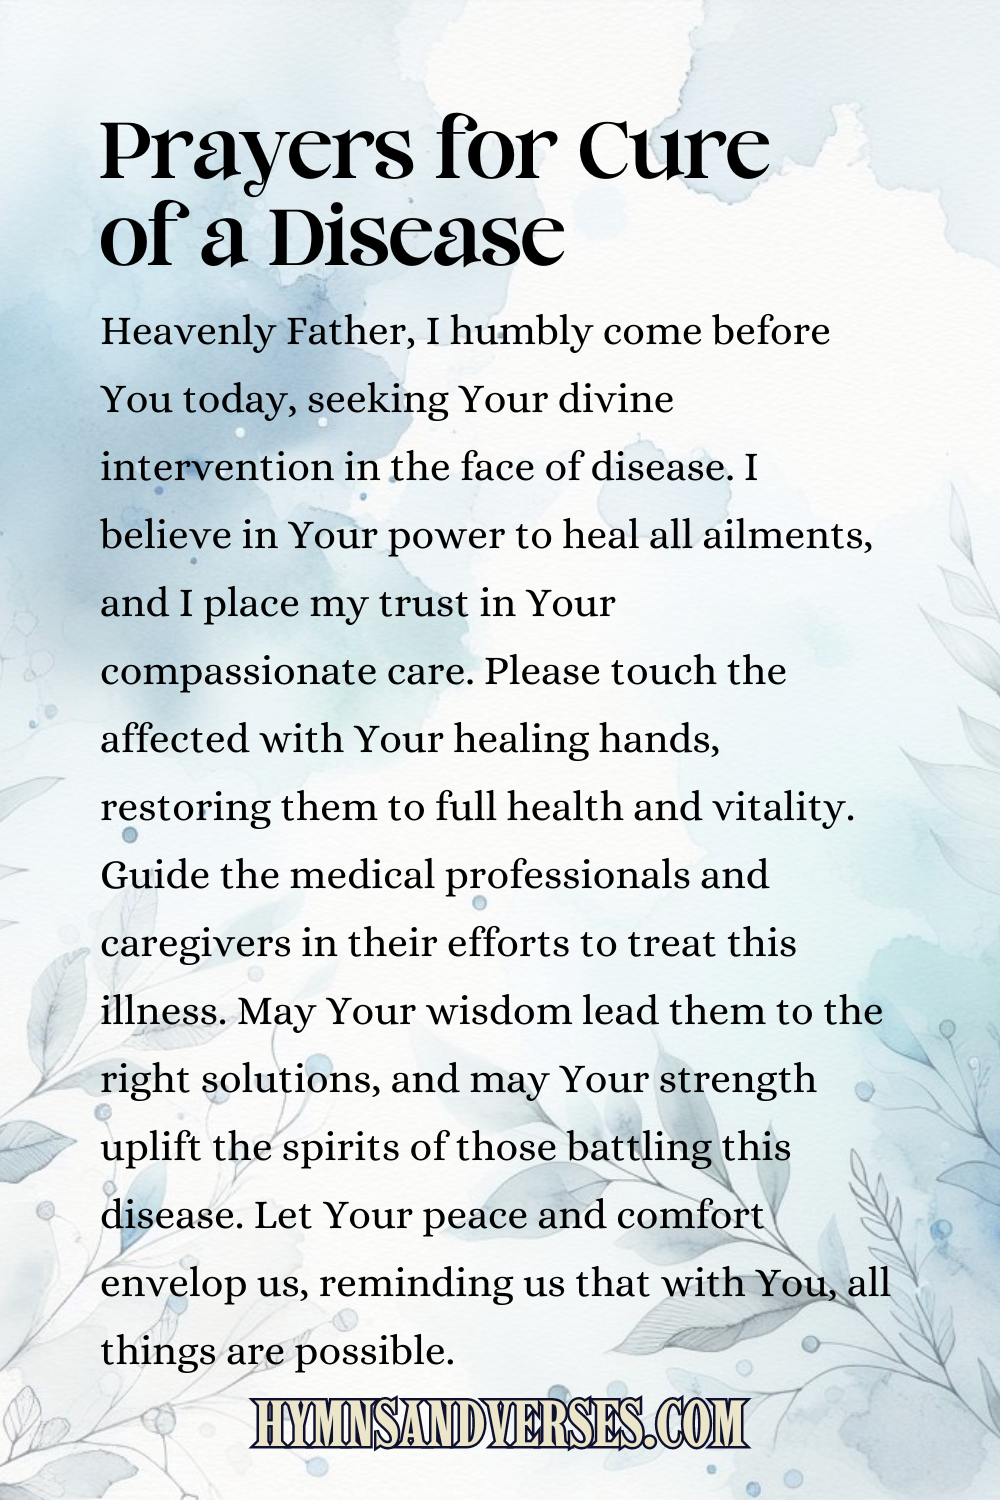 Pin sized image for prayers for cure of a disease, reads: Heavenly Father, I humbly come before You today, seeking Your divine intervention in the face of disease. I believe in Your power to heal all ailments, and I place my trust in Your compassionate care. Please touch the affected with Your healing hands, restoring them to full health and vitality. Guide the medical professionals and caregivers in their efforts to treat this illness. May Your wisdom lead them to the right solutions, and may Your strength uplift the spirits of those battling this disease. Let Your peace and comfort envelop us, reminding us that with You, all things are possible.